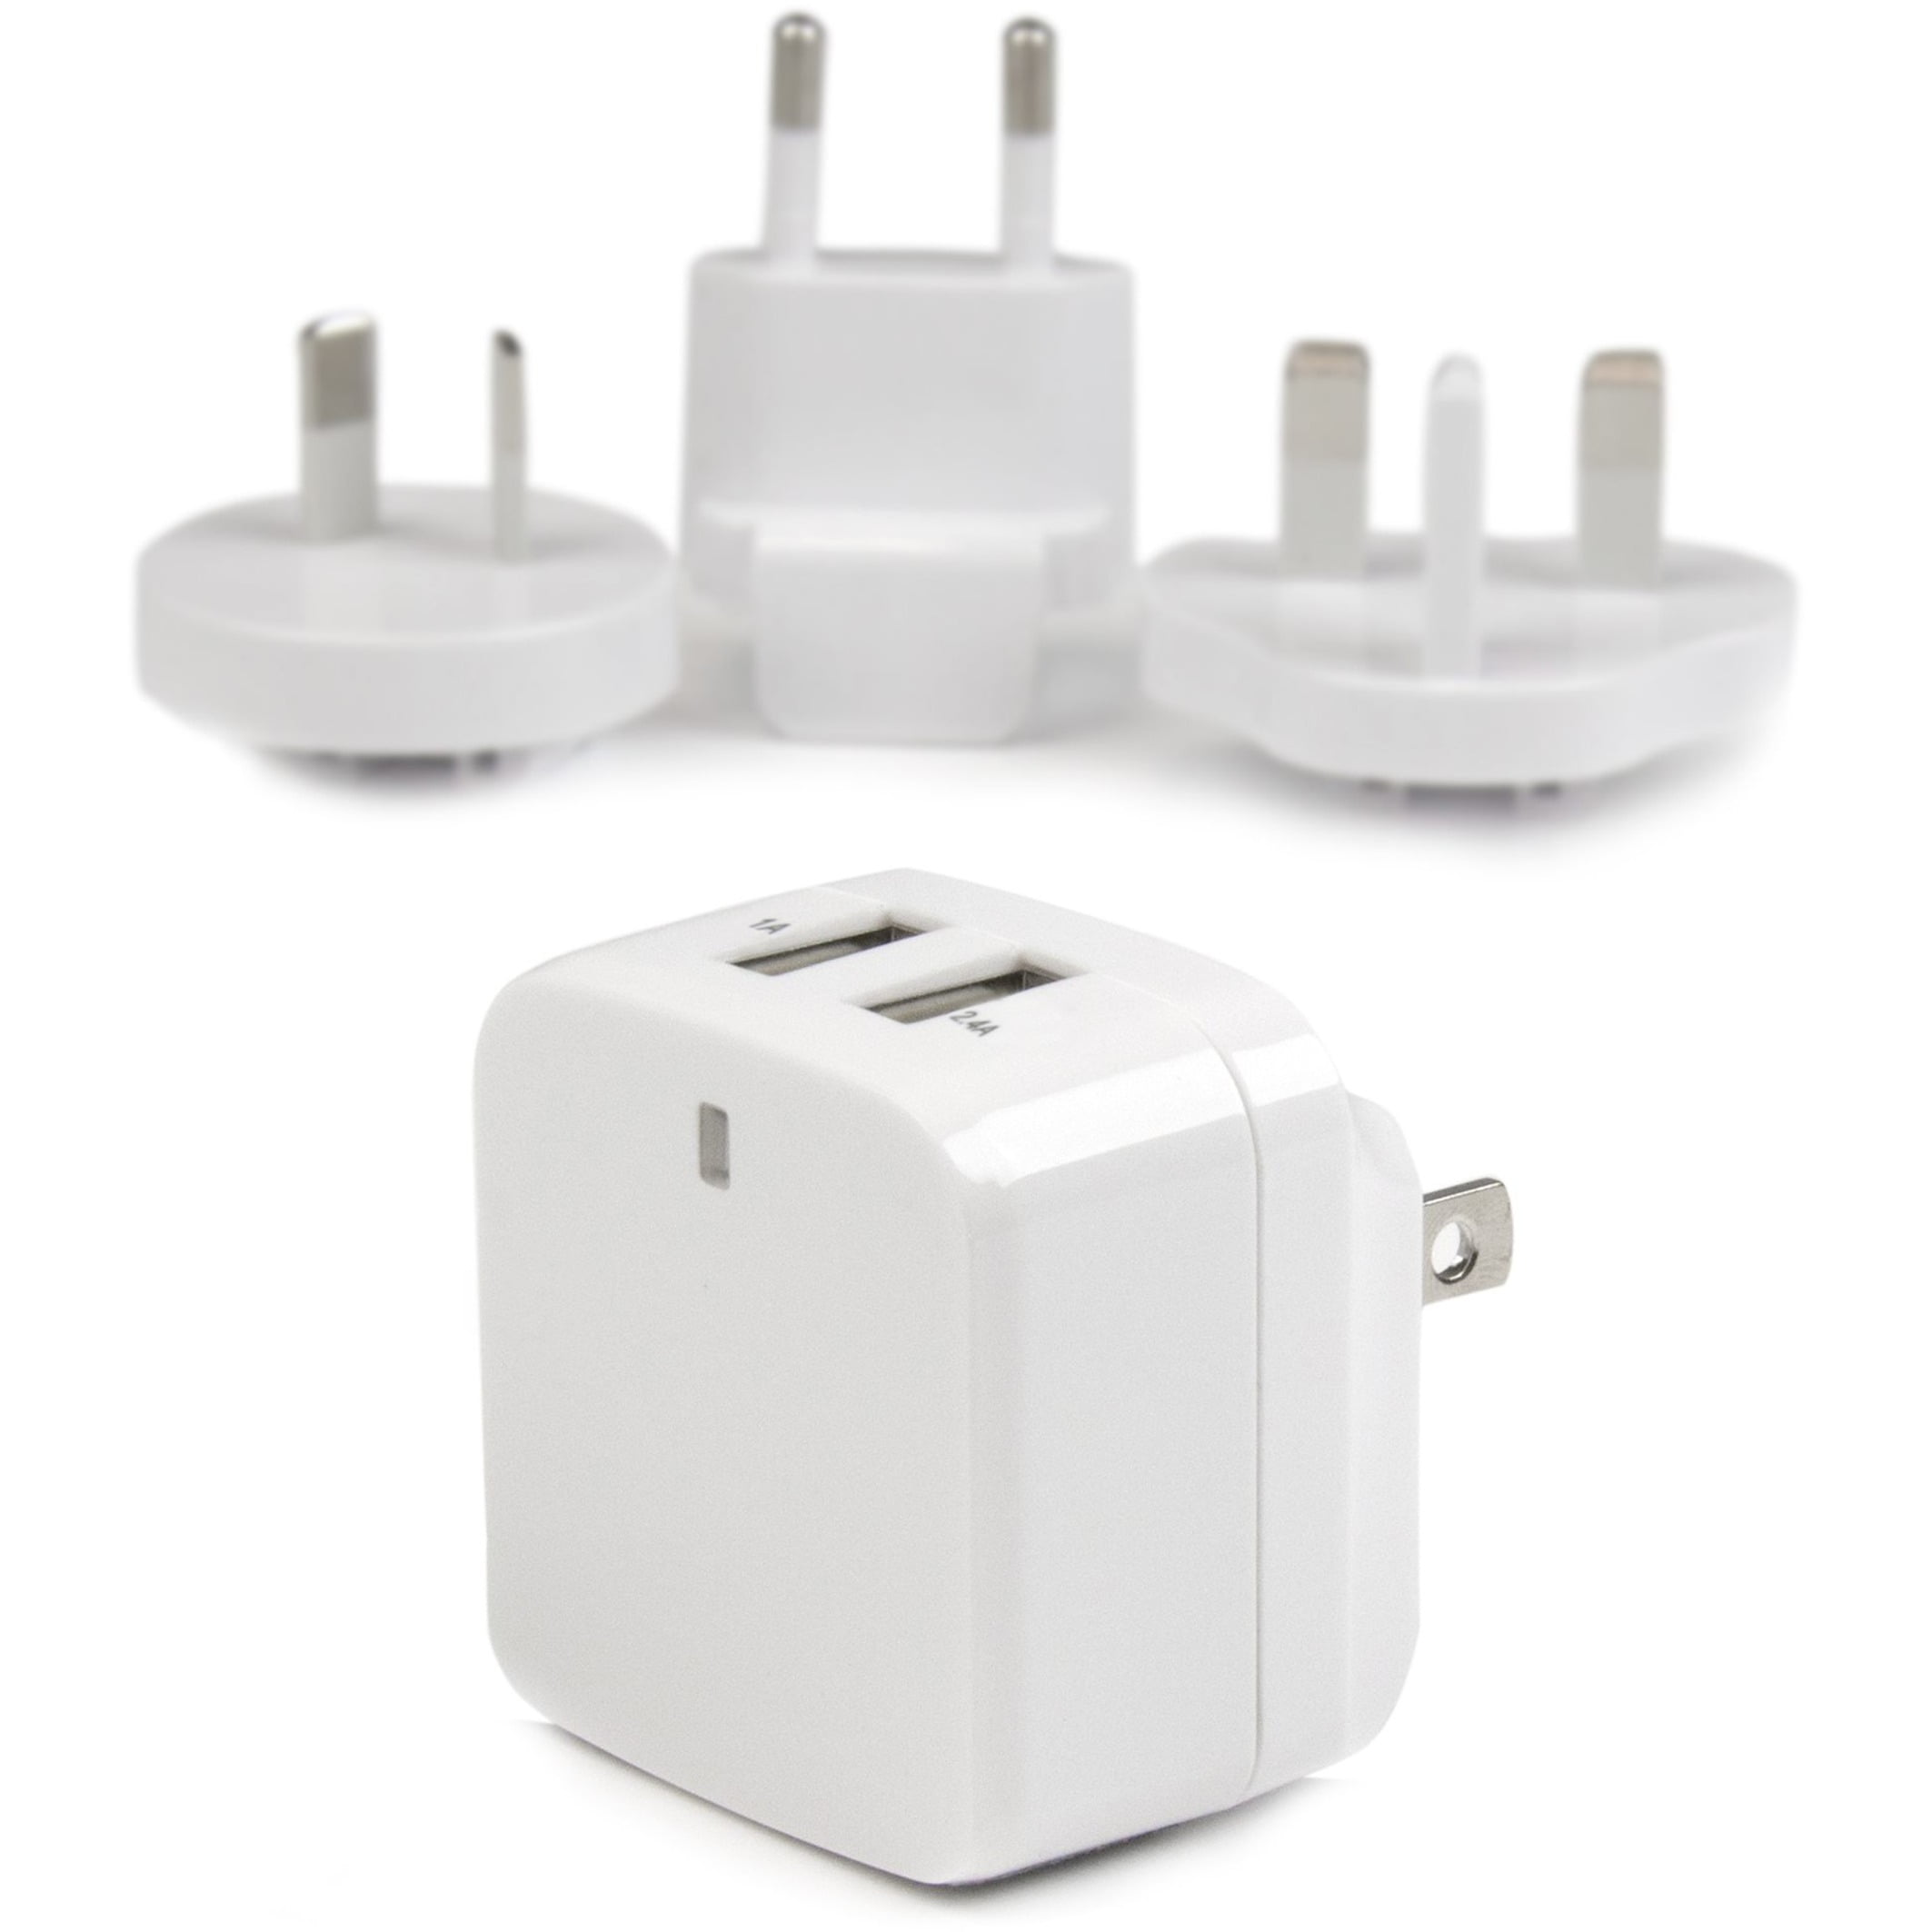 StarTech.com Travel USB Wall Charger, 2 Port, White, Universal Travel Adapter, International Power Adapter, USB Charger